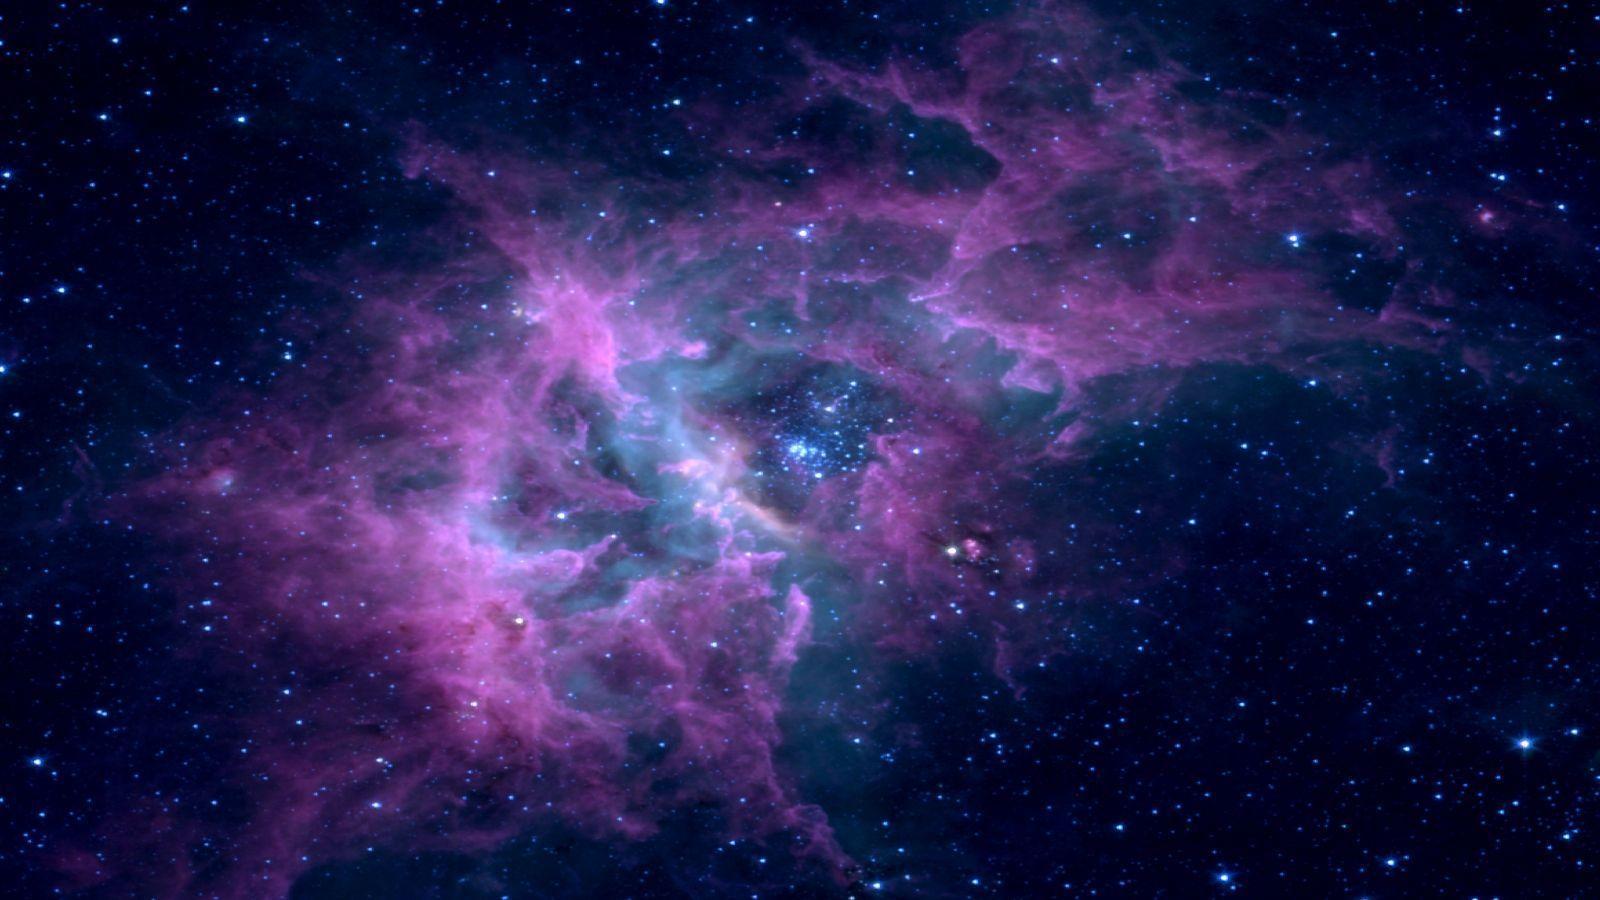 Download 1600x900 Resolution of high resolution space nebula 7104